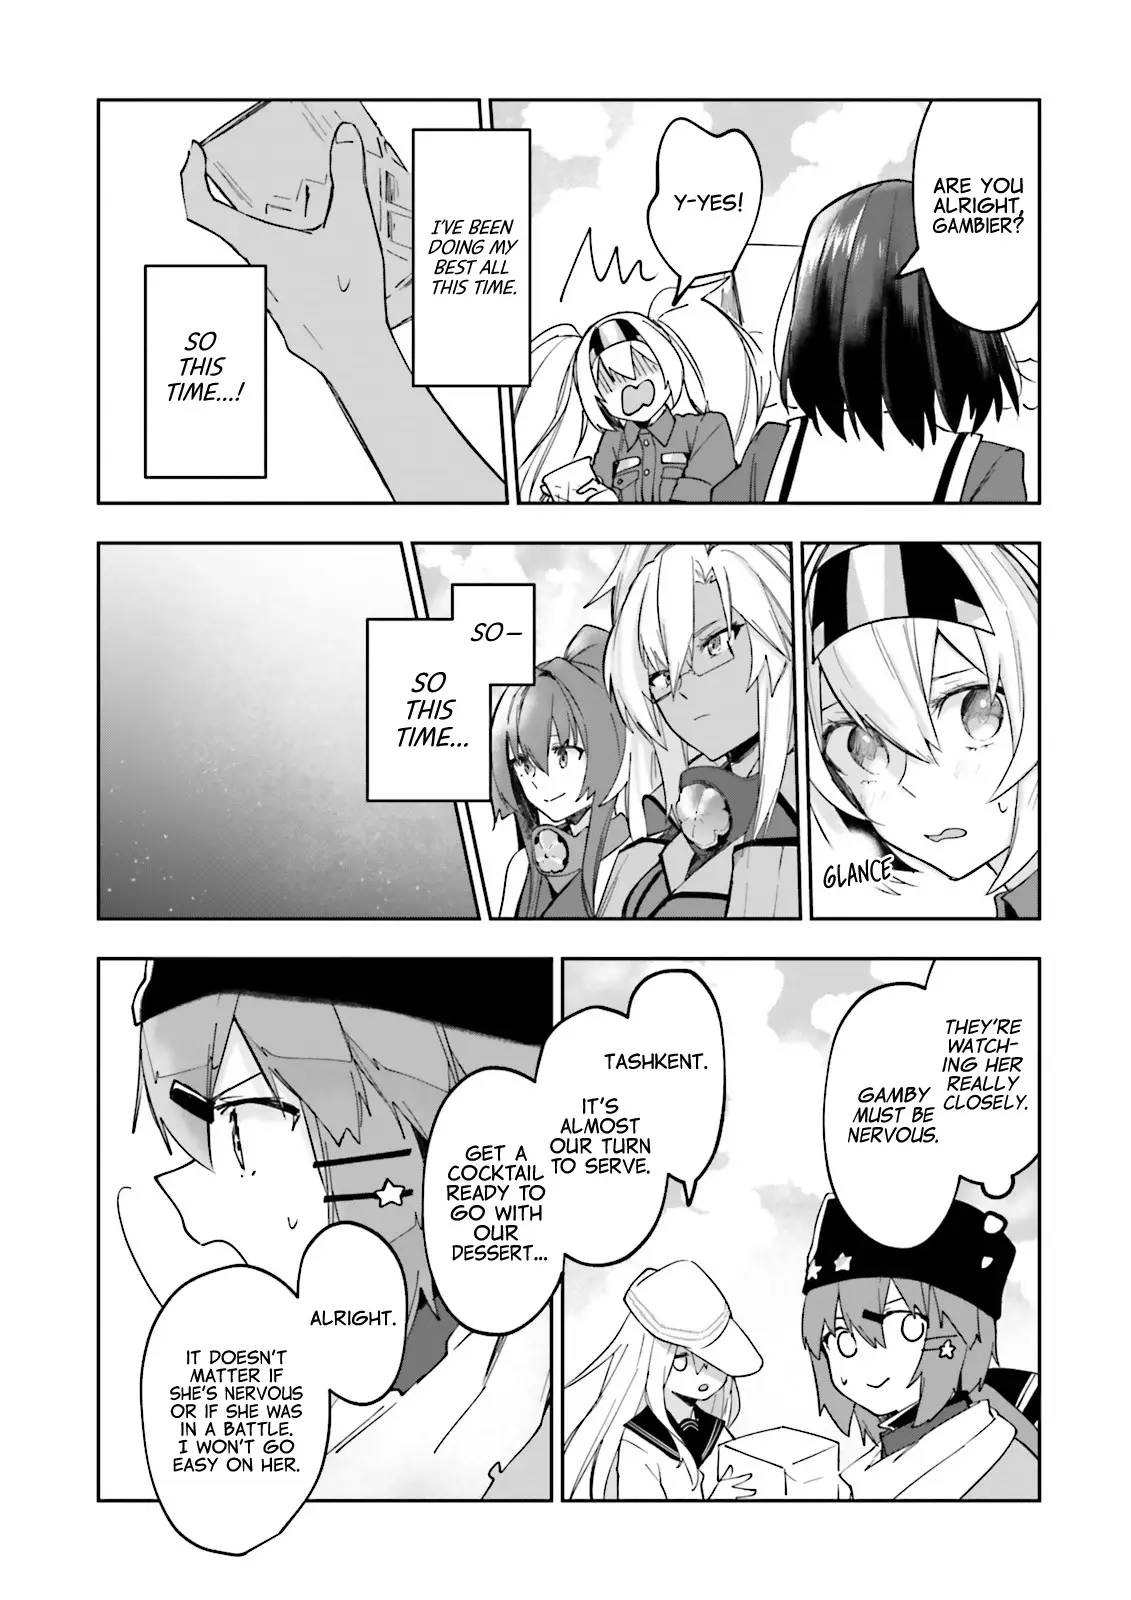 Kantai Collection -Kancolle- Tonight, Another "salute"! - 23 page 18-4485eb1d